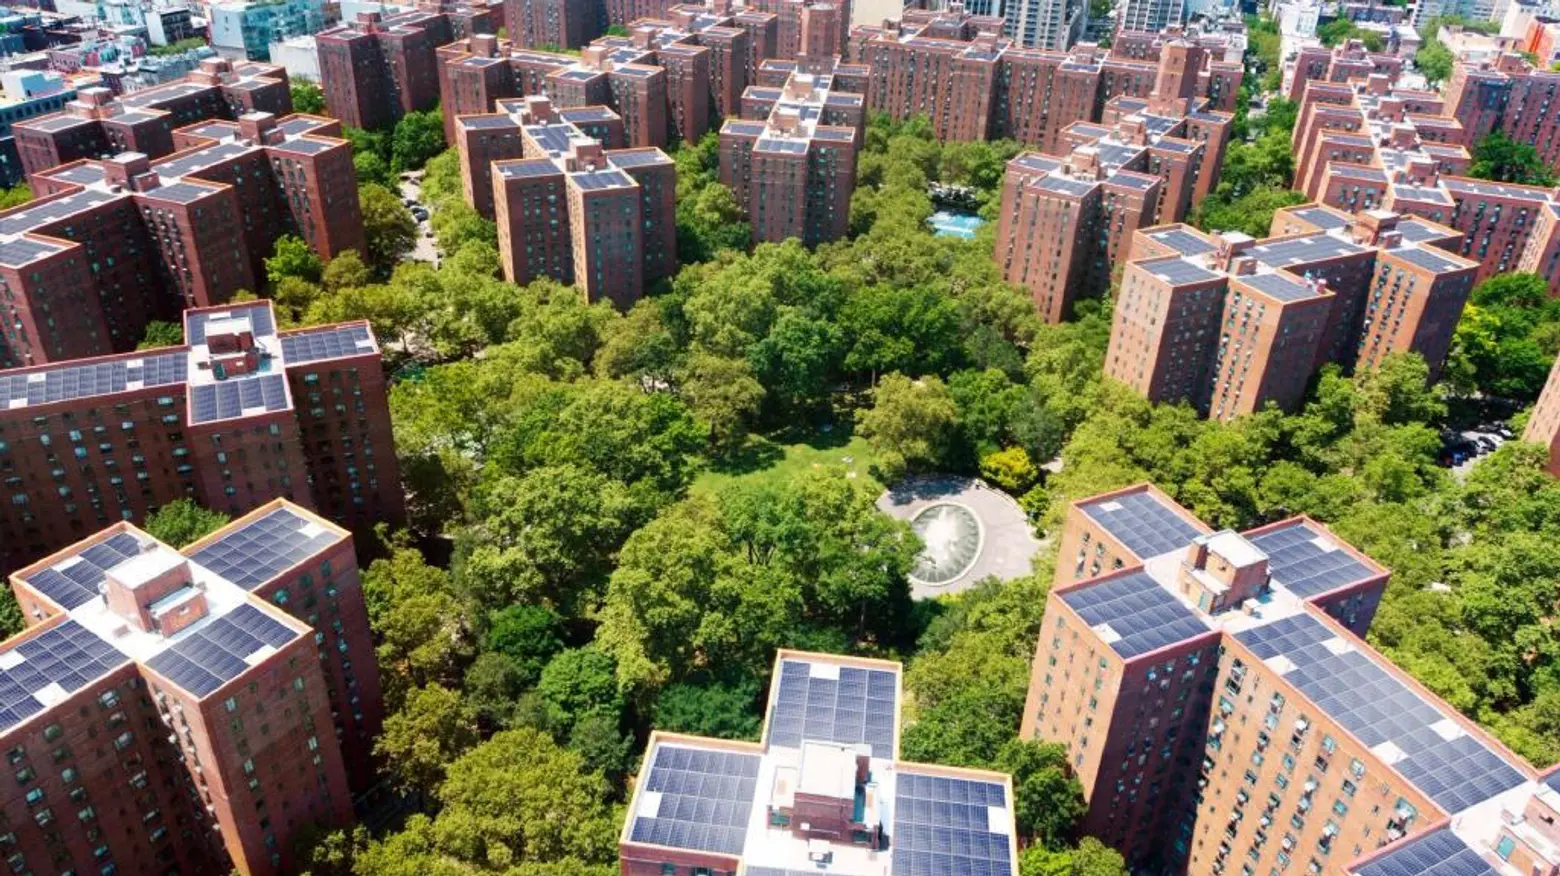 StuyTown will be Manhattan’s largest solar power producer after $10M rooftop panel investment